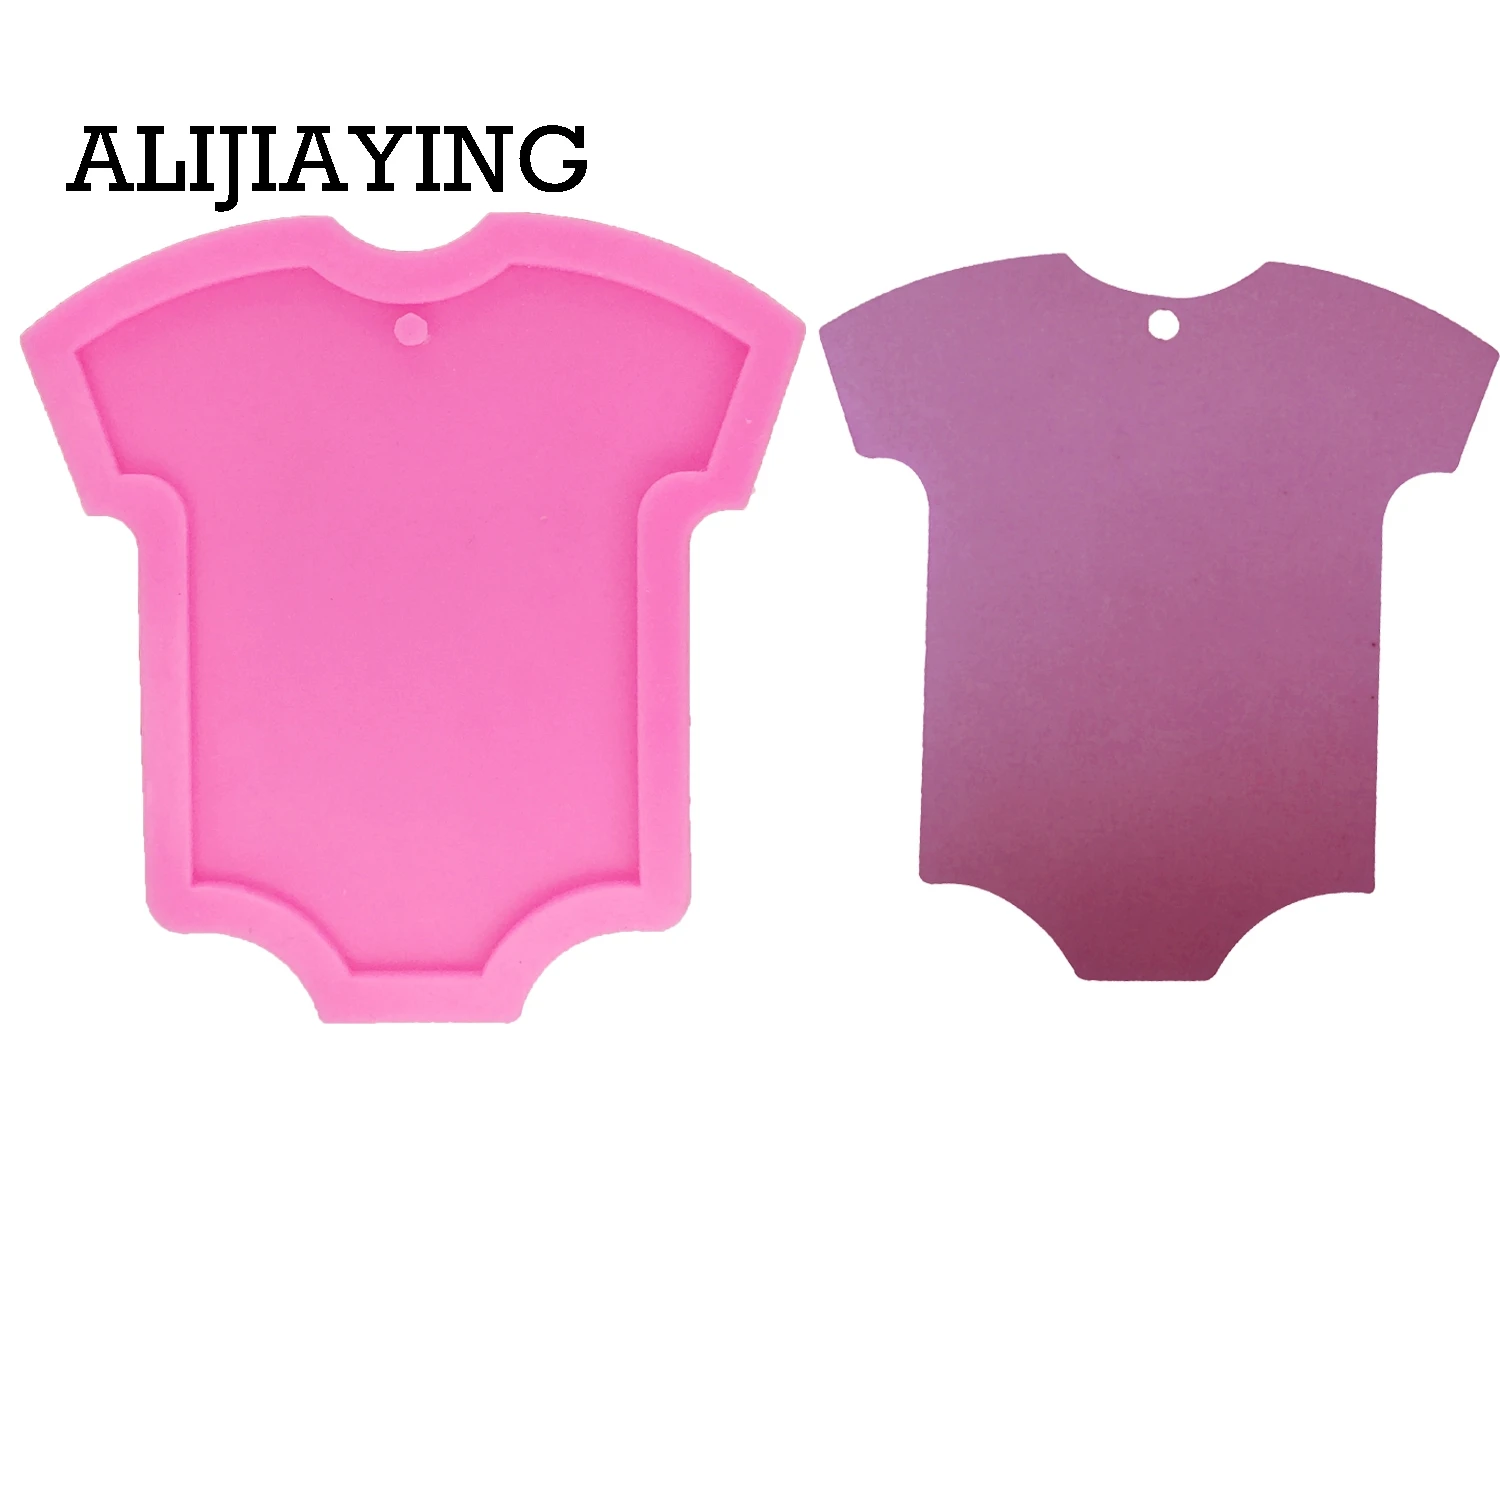 DY0062 DIY shiny Baby t-shirt shape silicone mold for key chains Accessories clothes Resin Clay Mold crafts tools moulds jewelry